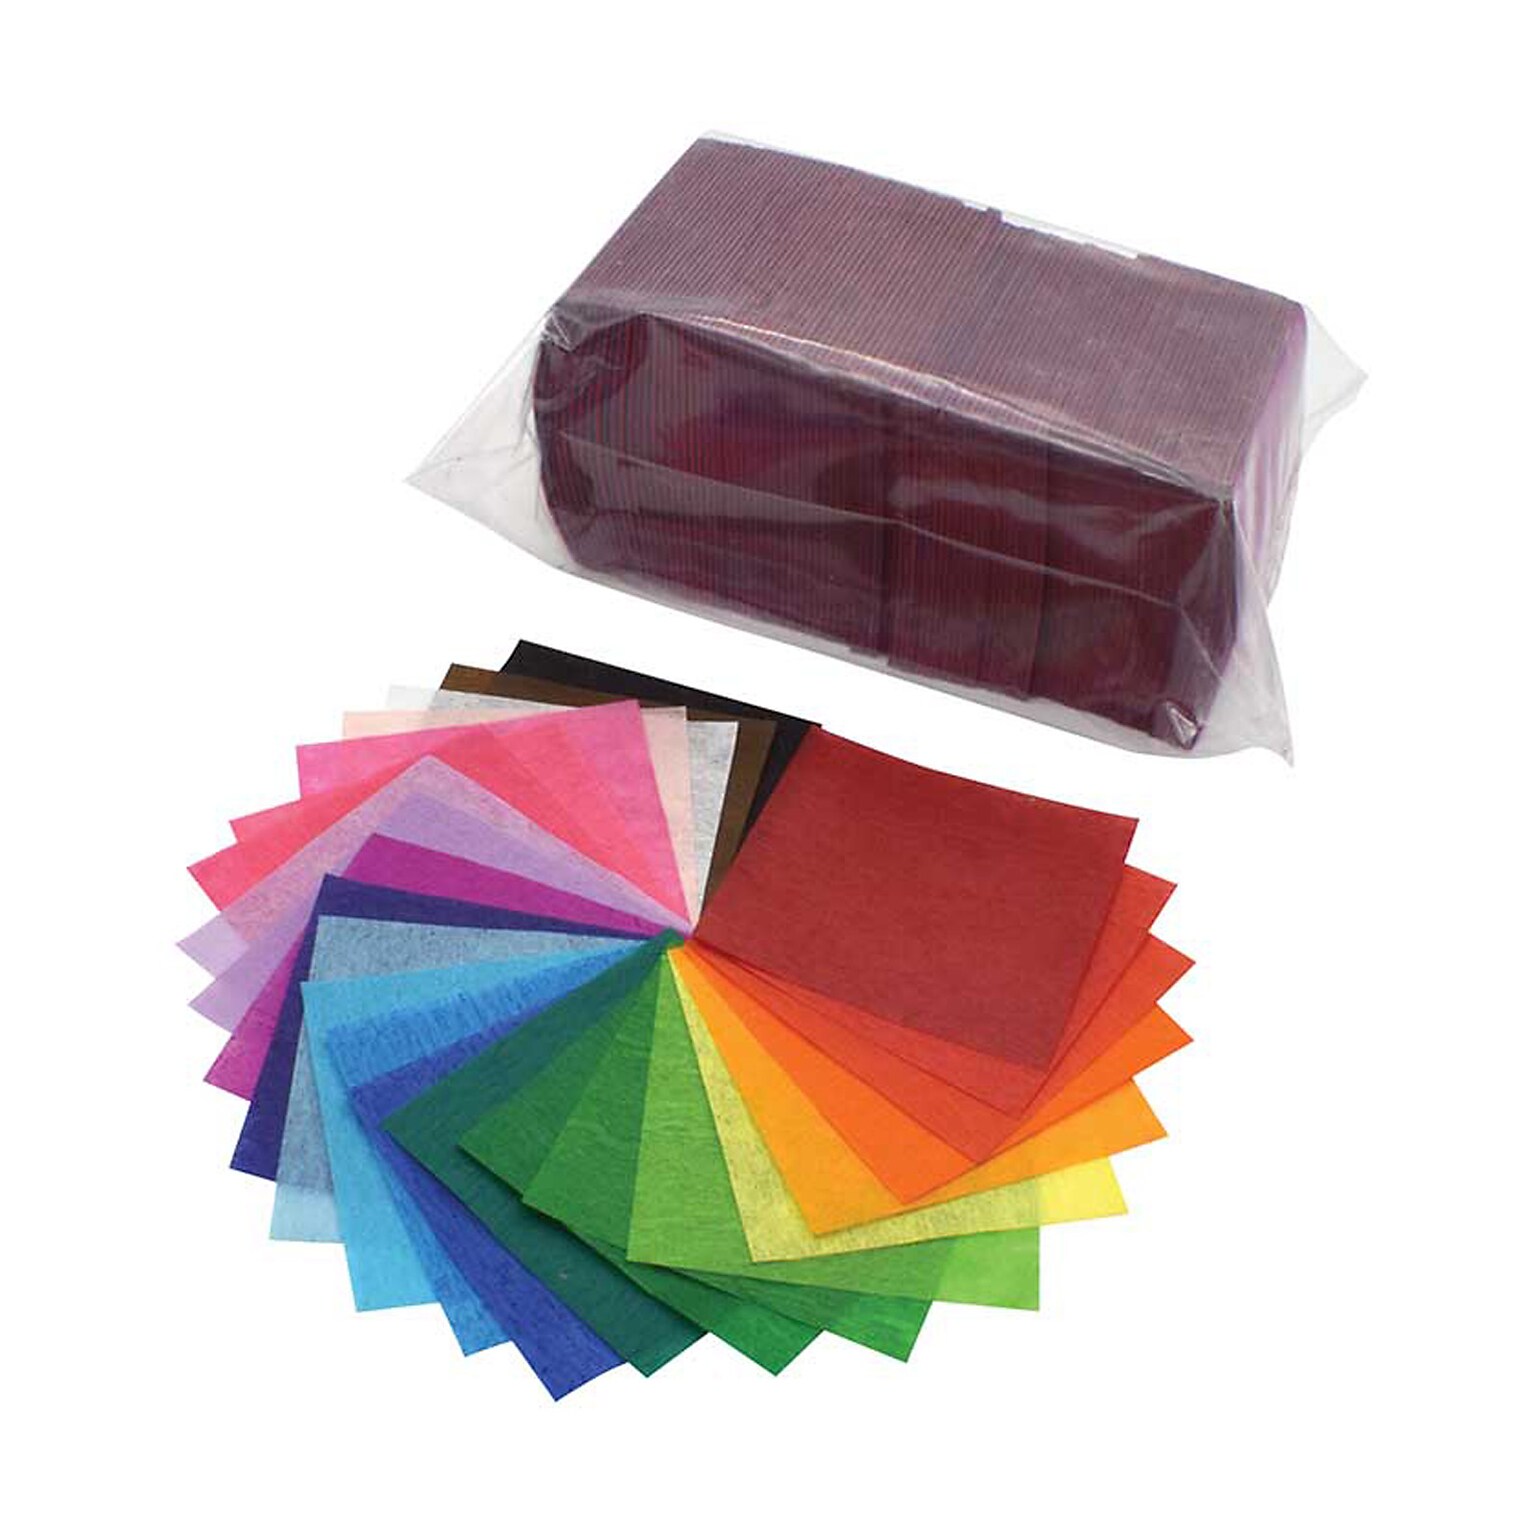 Spectra® Deluxe Bleeding Art Tissue Squares, 1.5 x 1.5, 25 Assorted Colors, 2500 Squares (PAC58525)